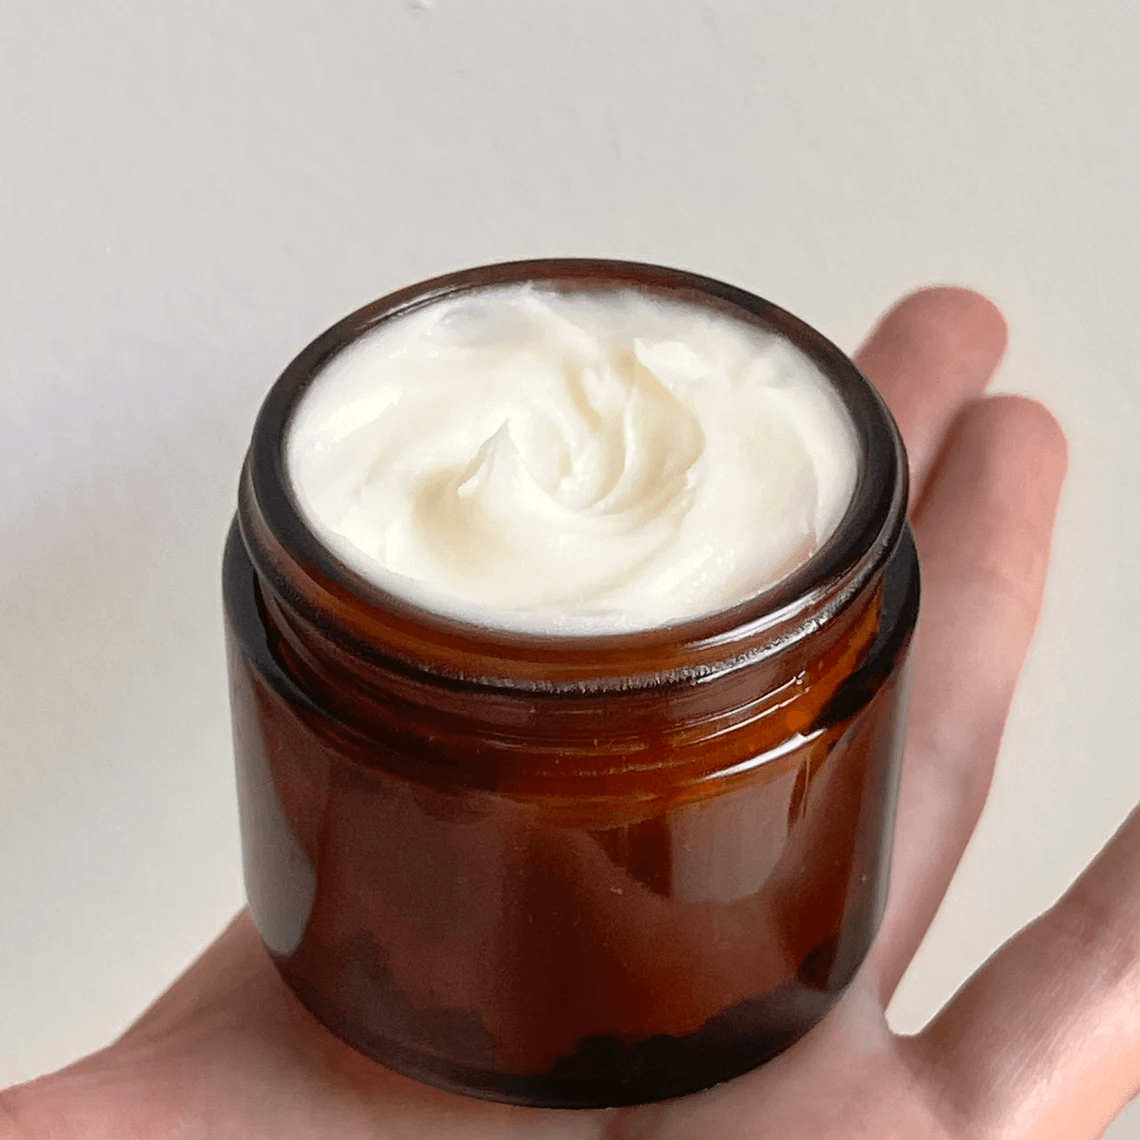 All-Purpose Whipped Tallow Balm – The Basic Stitch